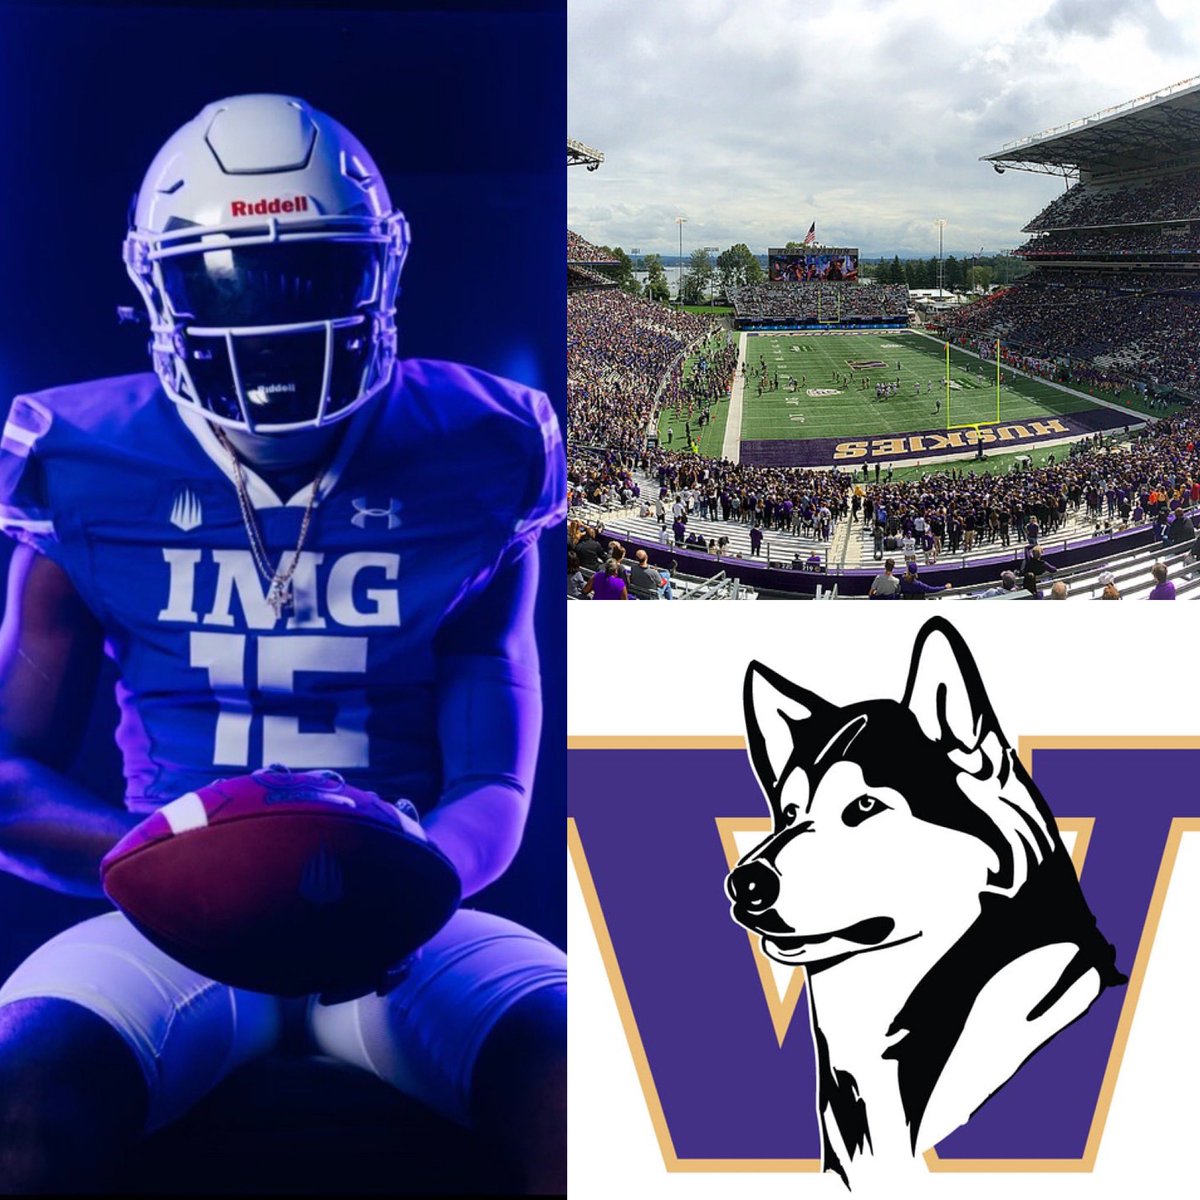 I am extremely blessed and humbled to say that I have received an offer from The University of Washington @UW_Football @CoachJRich @LacedfactDreams @adamgorney @demetricDWarren @TheUCReport @Scott_Schrader @Zack_poff_MP @GregBiggins @dzoloty @BrandonHuffman @CoachKiddIMG